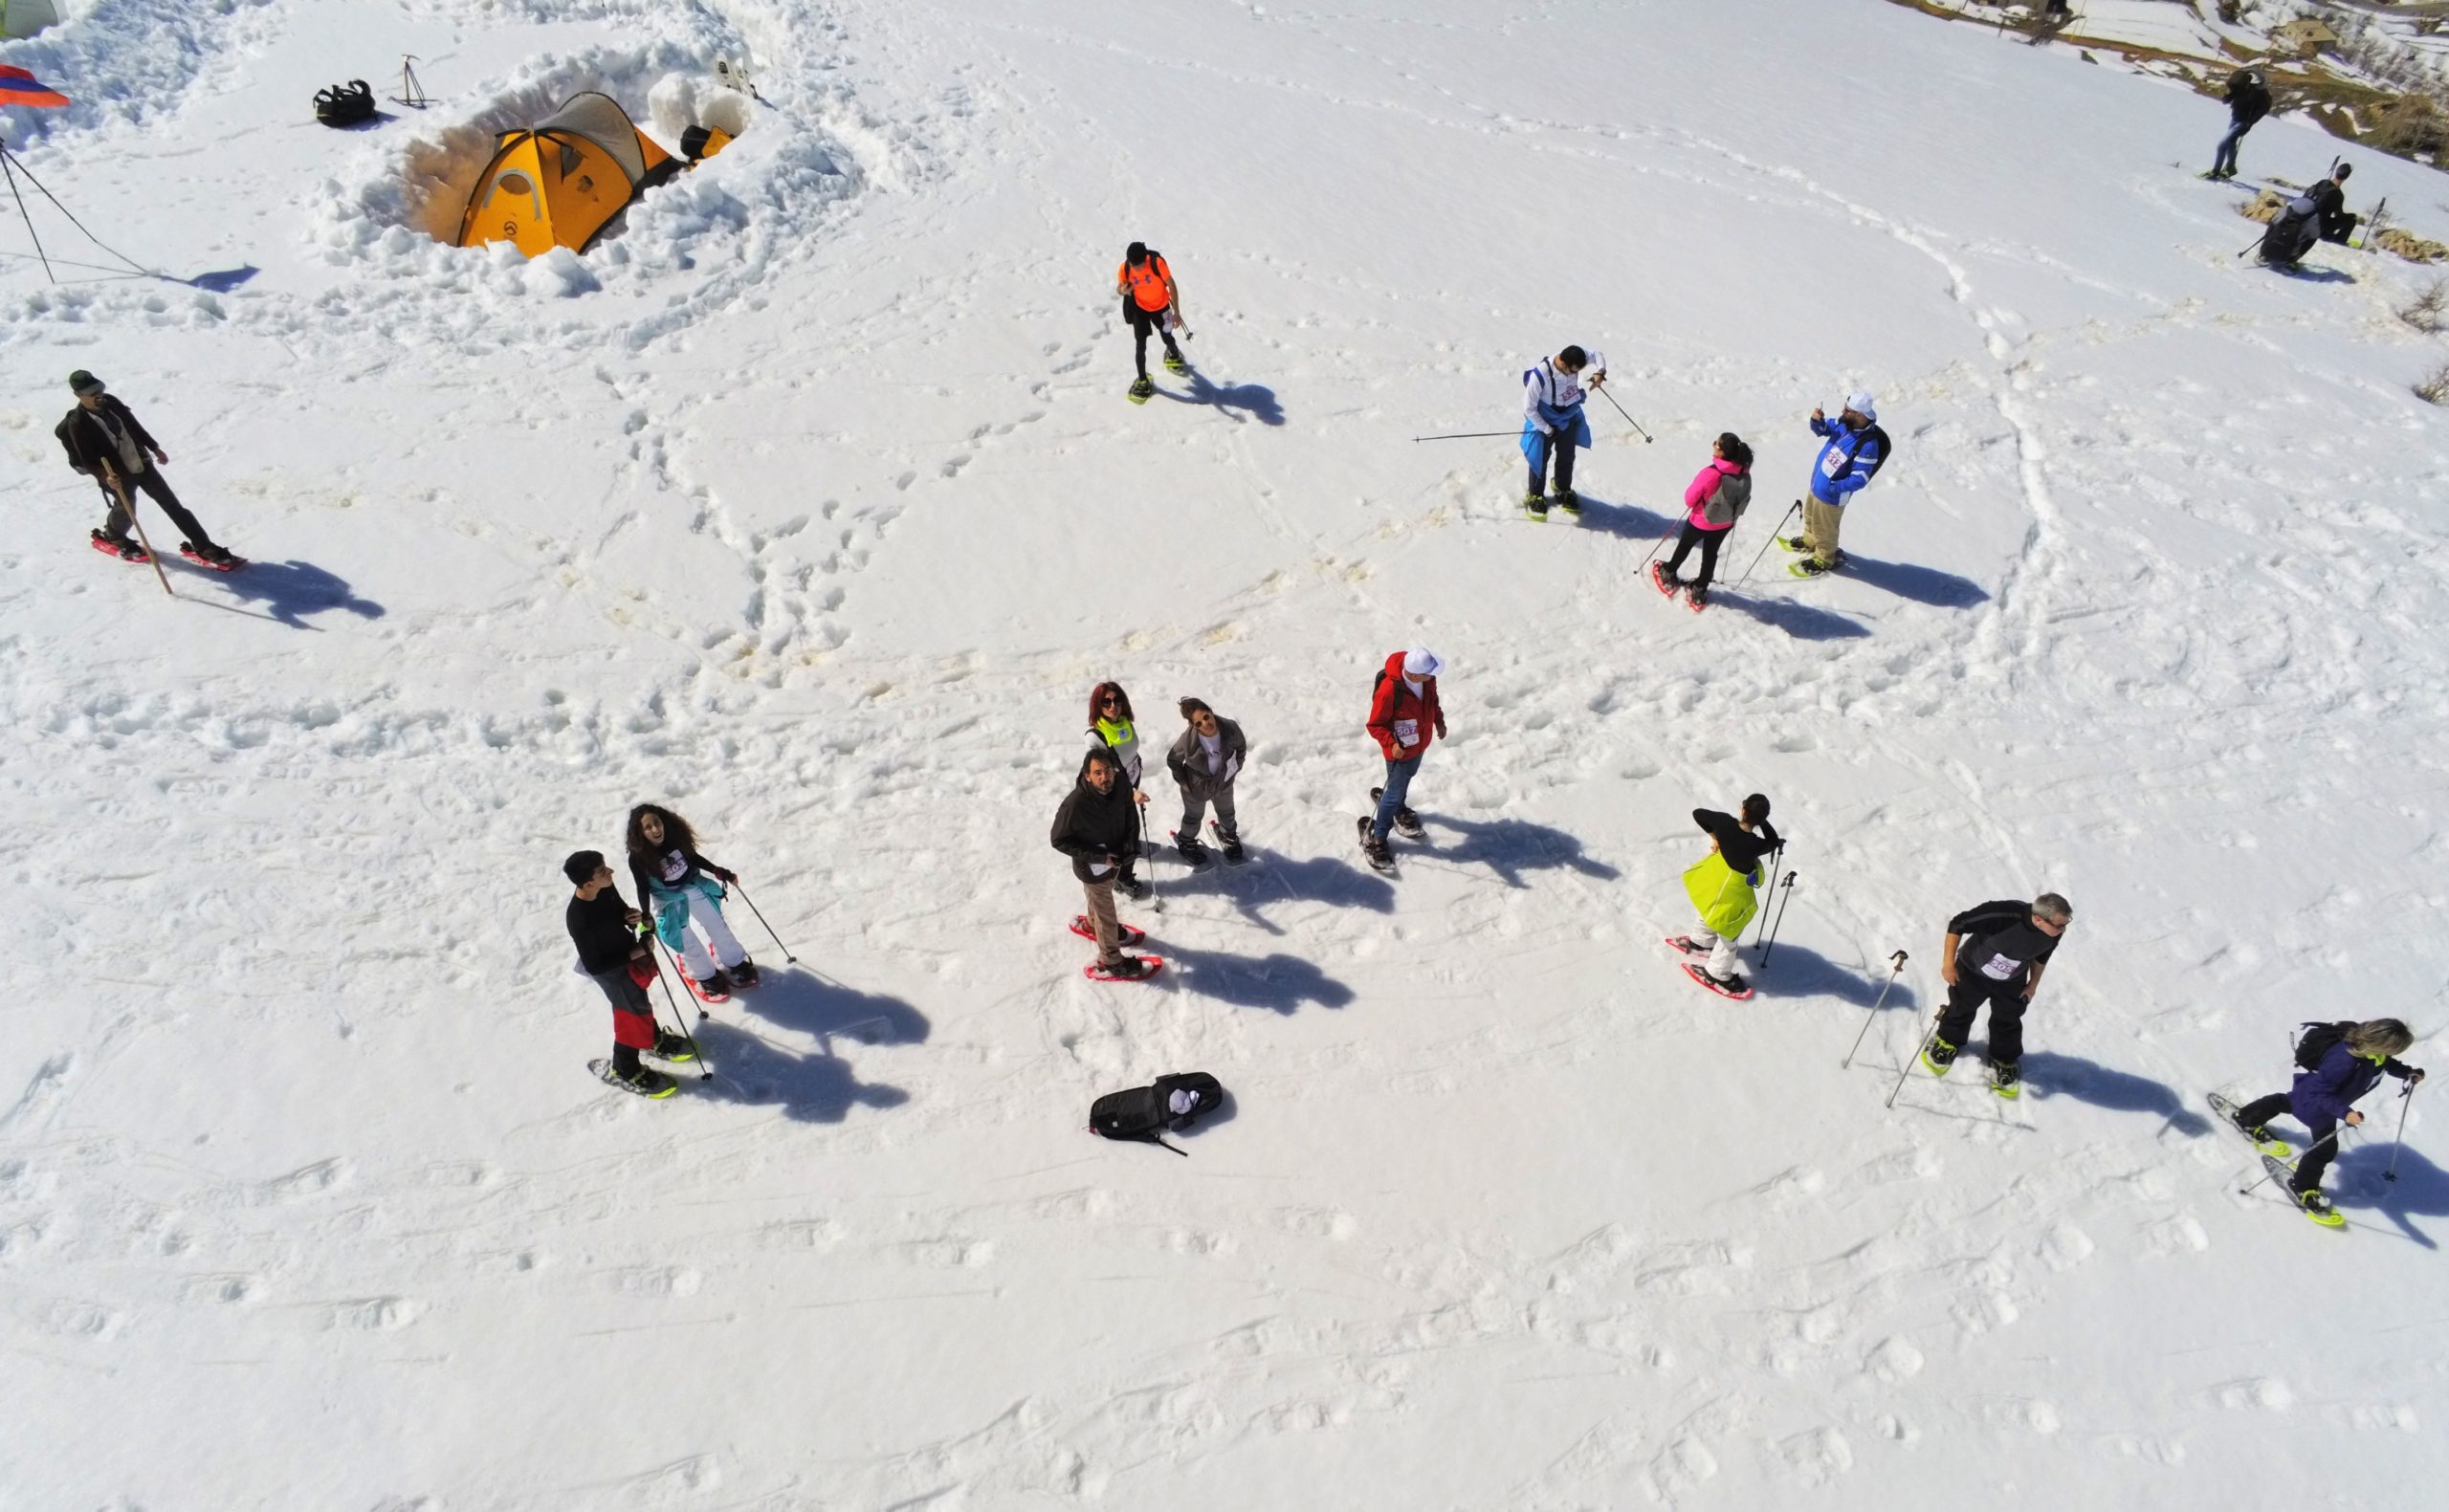 Group of people on snow